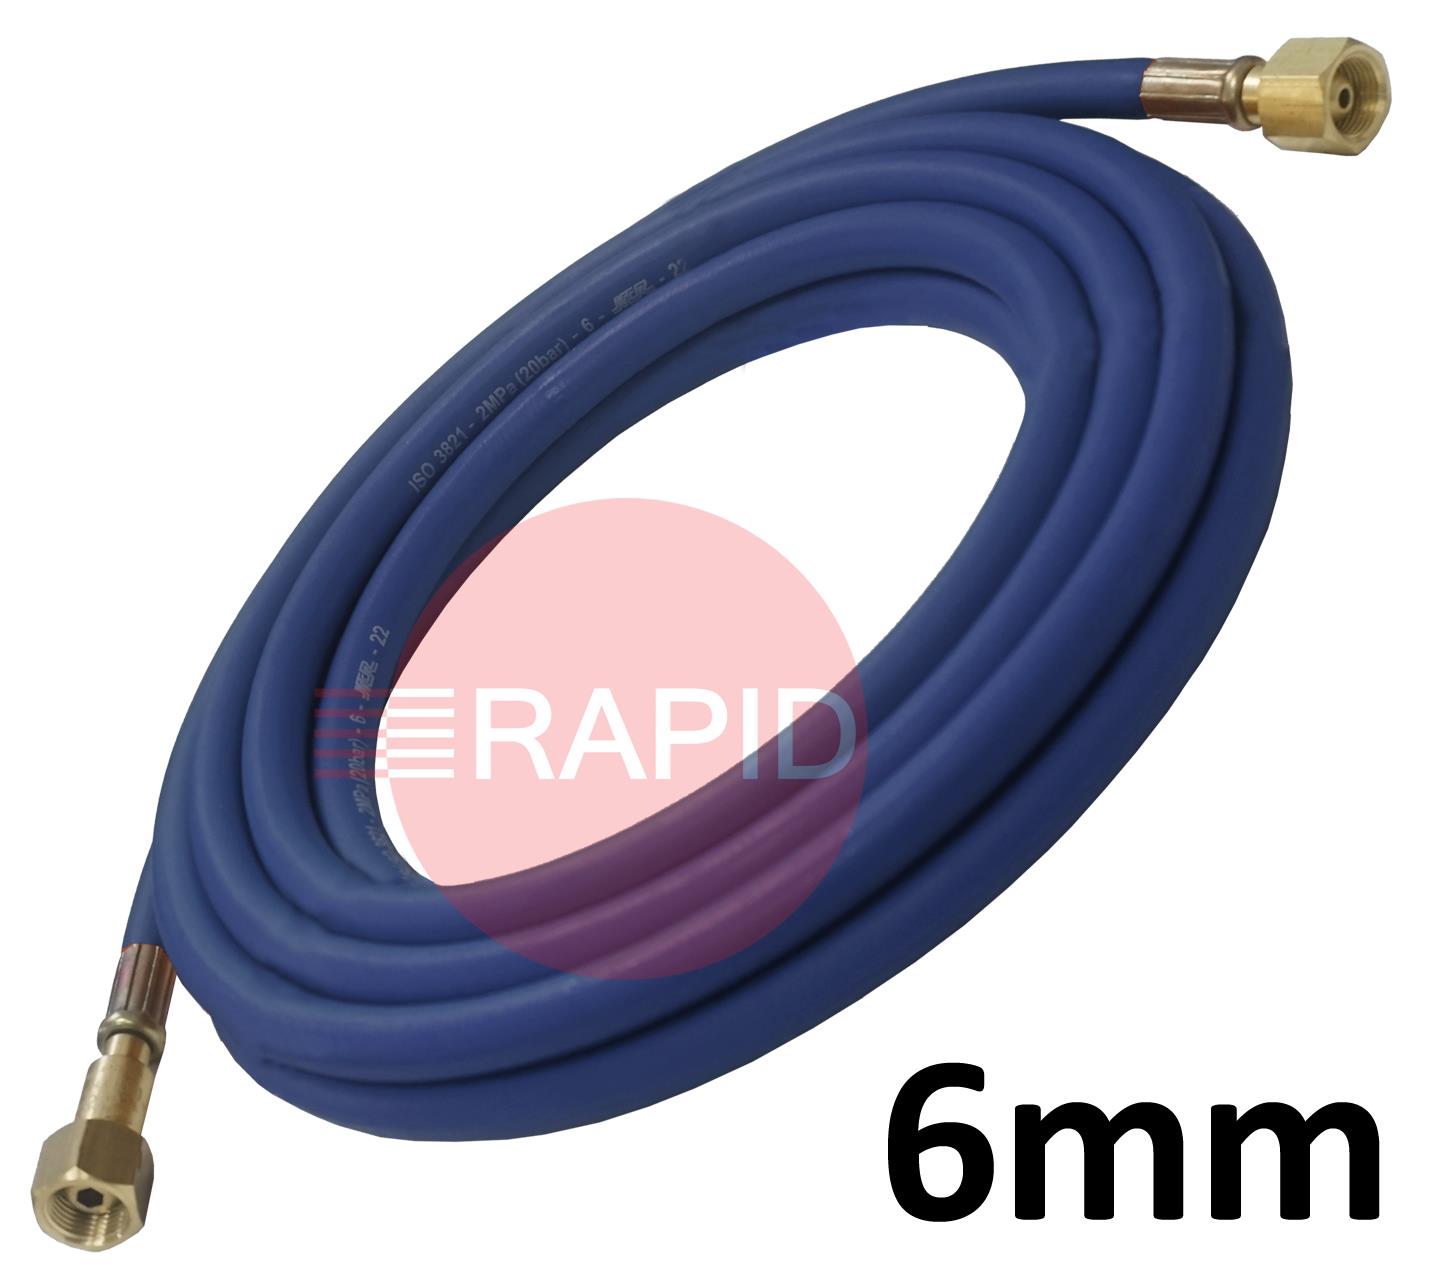 A5112  Fitted Oxygen Hose. 6mm Bore. G3/8 Check Valve & G3/8 Regulator Connection - 10m